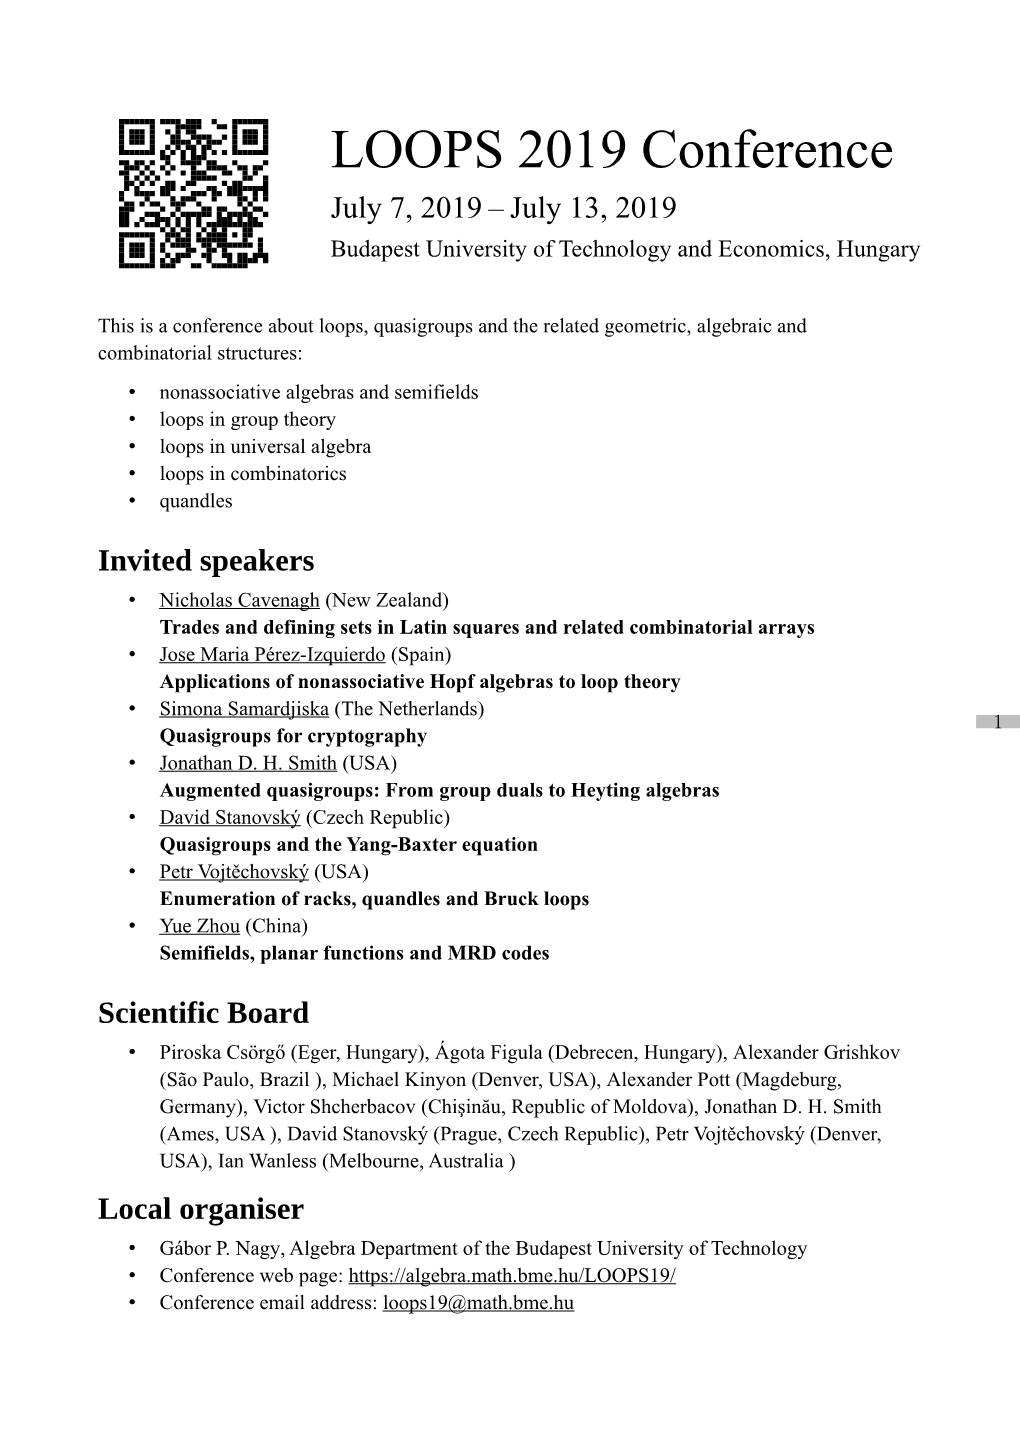 LOOPS 2019 Conference July 7, 2019 – July 13, 2019 Budapest University of Technology and Economics, Hungary